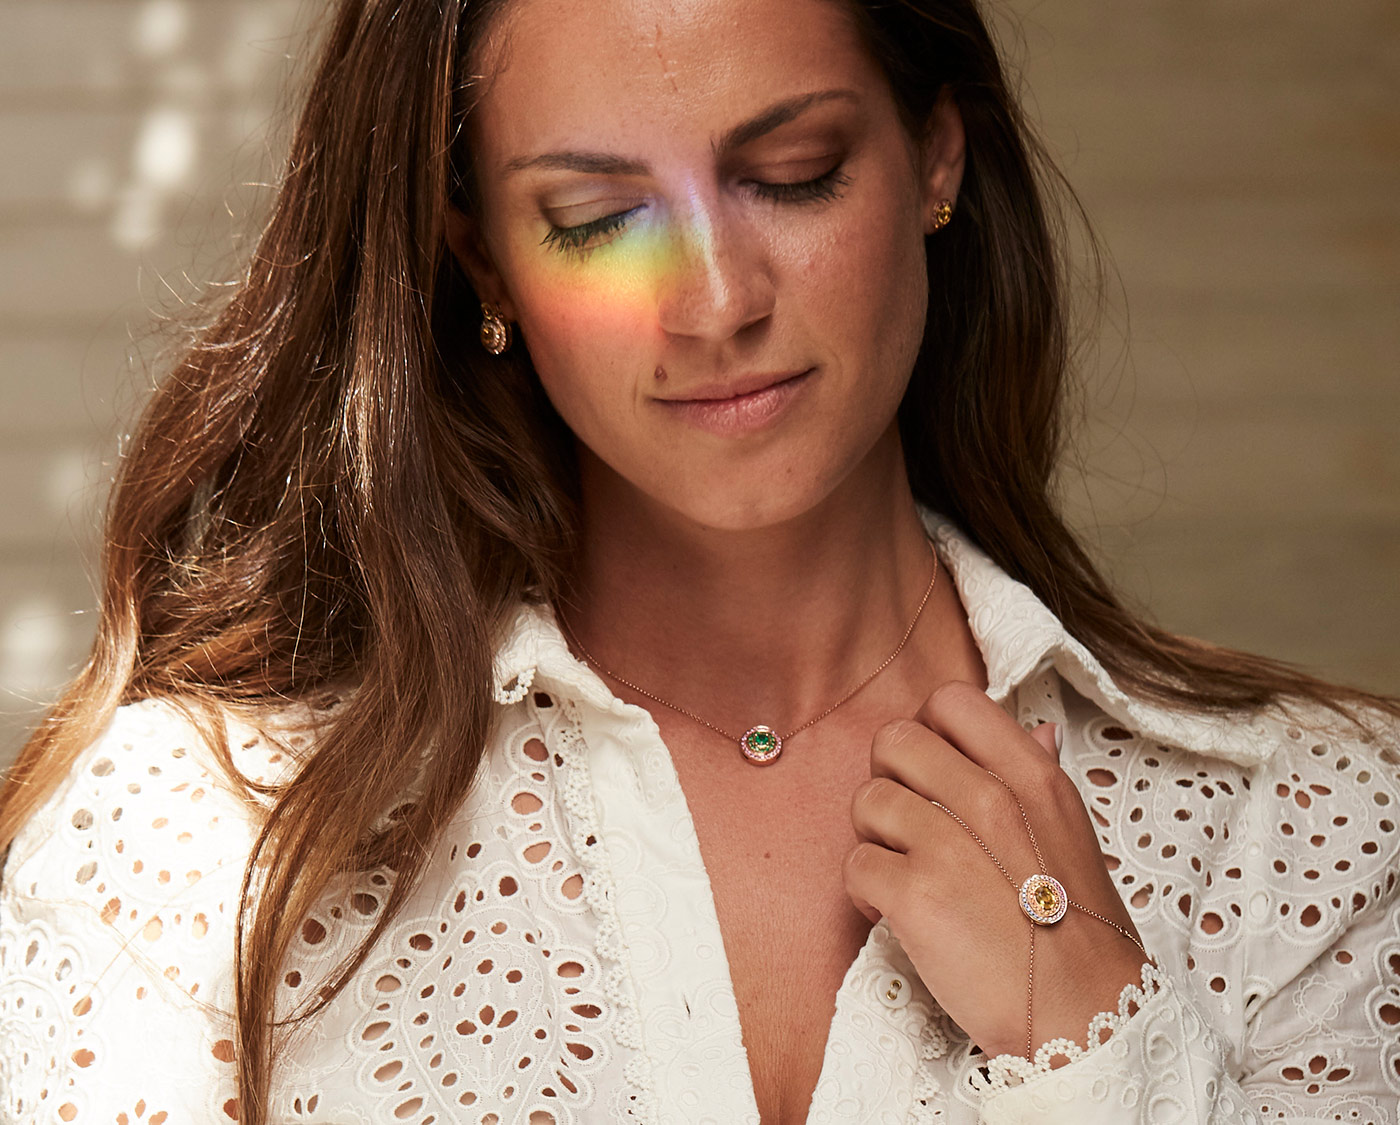 Alice Van Cal wearing her 'Alice Sphere' earrings with yellow sapphires and diamonds, pendant with emerald and diamonds, and the 'Alice Eclipse' hand jewel with central 1.15ct yellow sapphire and multi-coloured sapphires, all in 18k rose or yellow gold